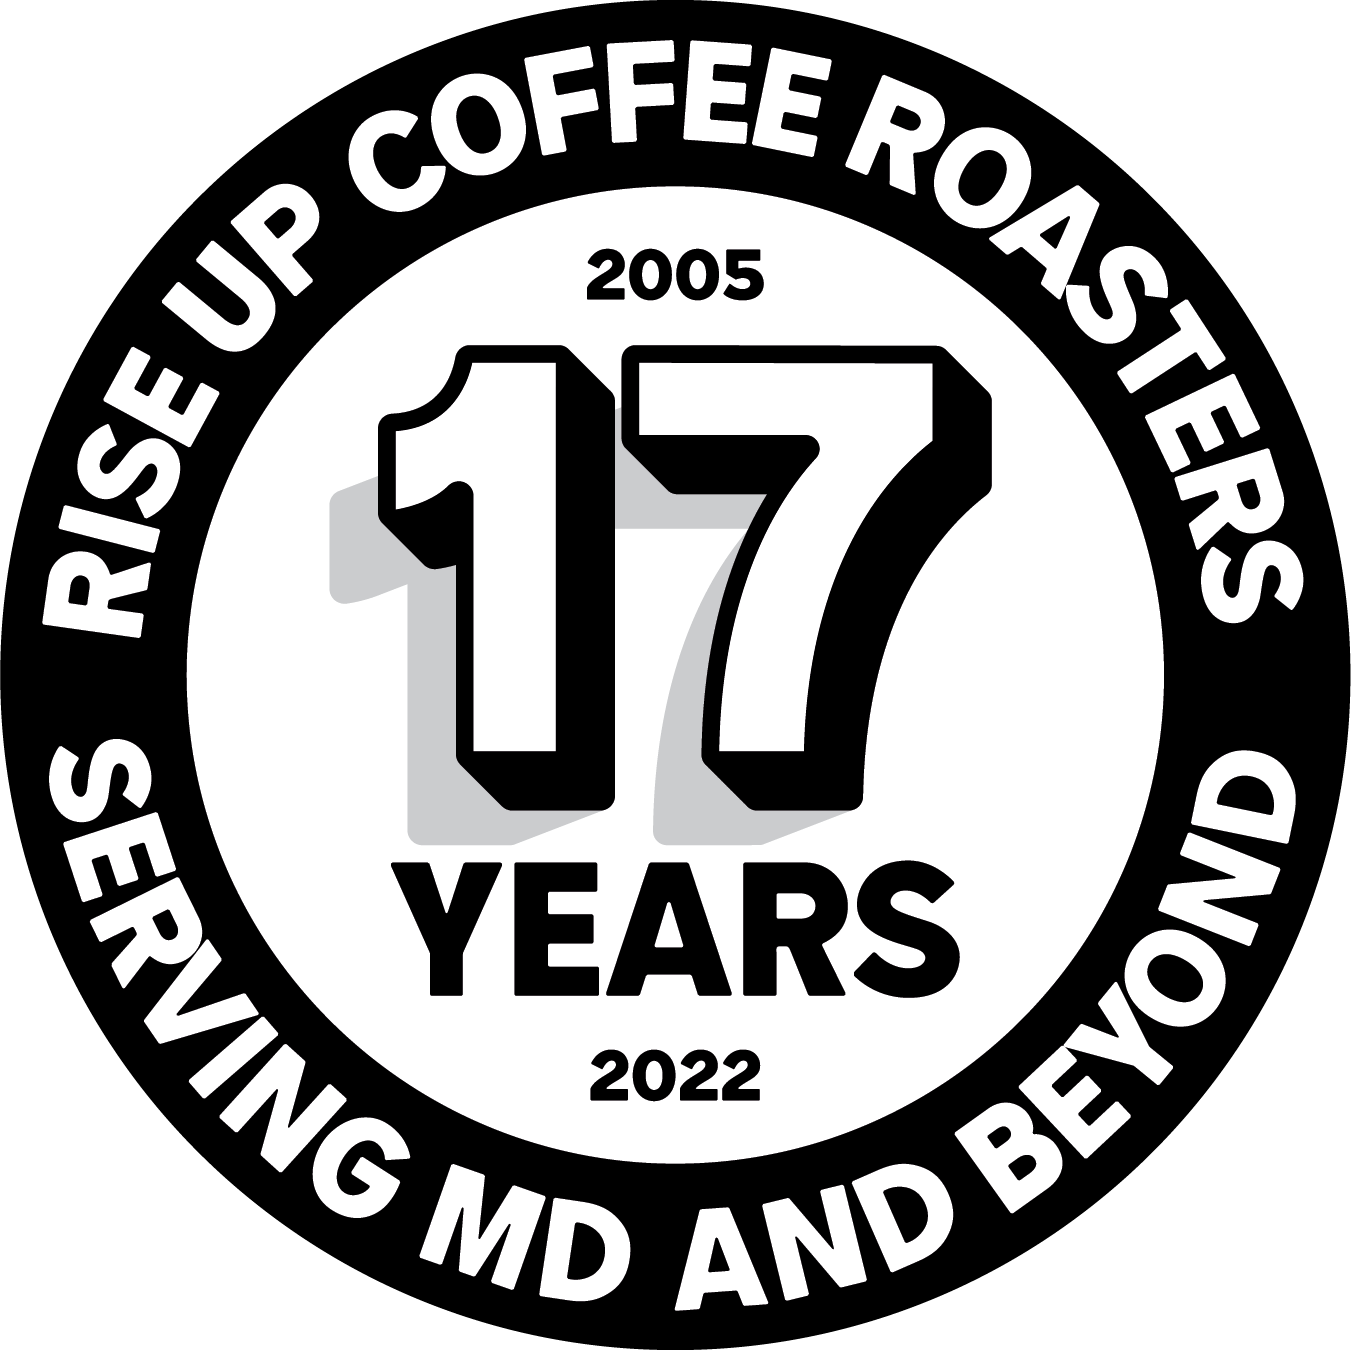 RISE UP COFFEE